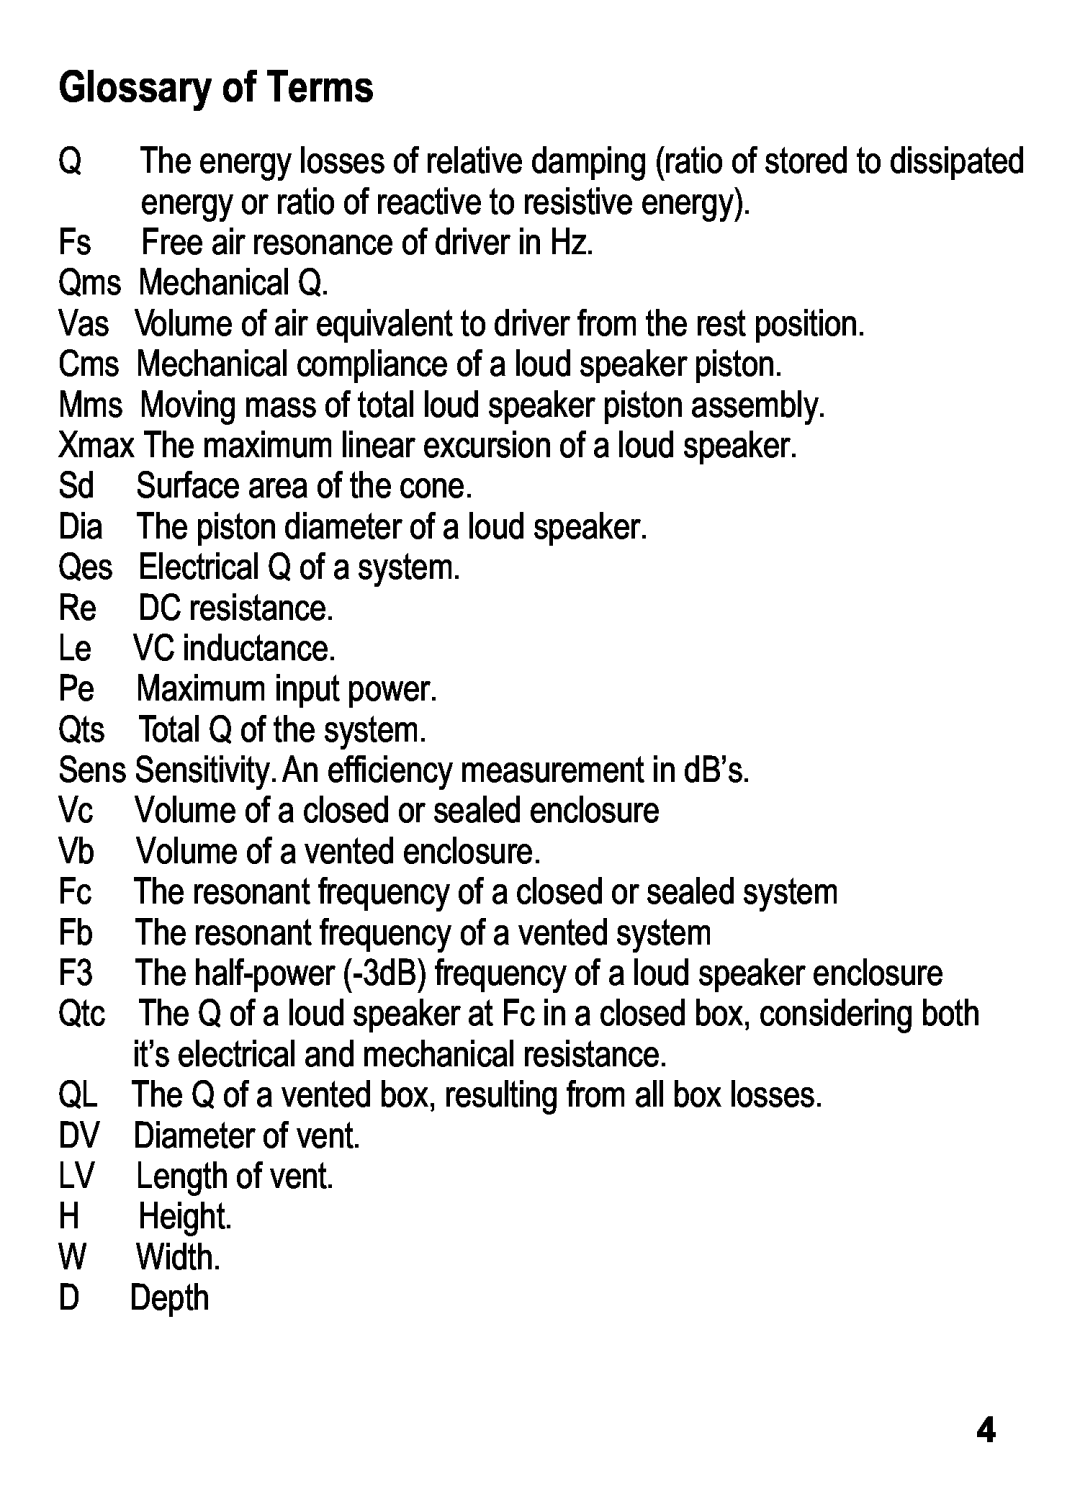 Olympus OLM1615, OLM2412, OLM1612, OLM2415 manual Glossary of Terms 